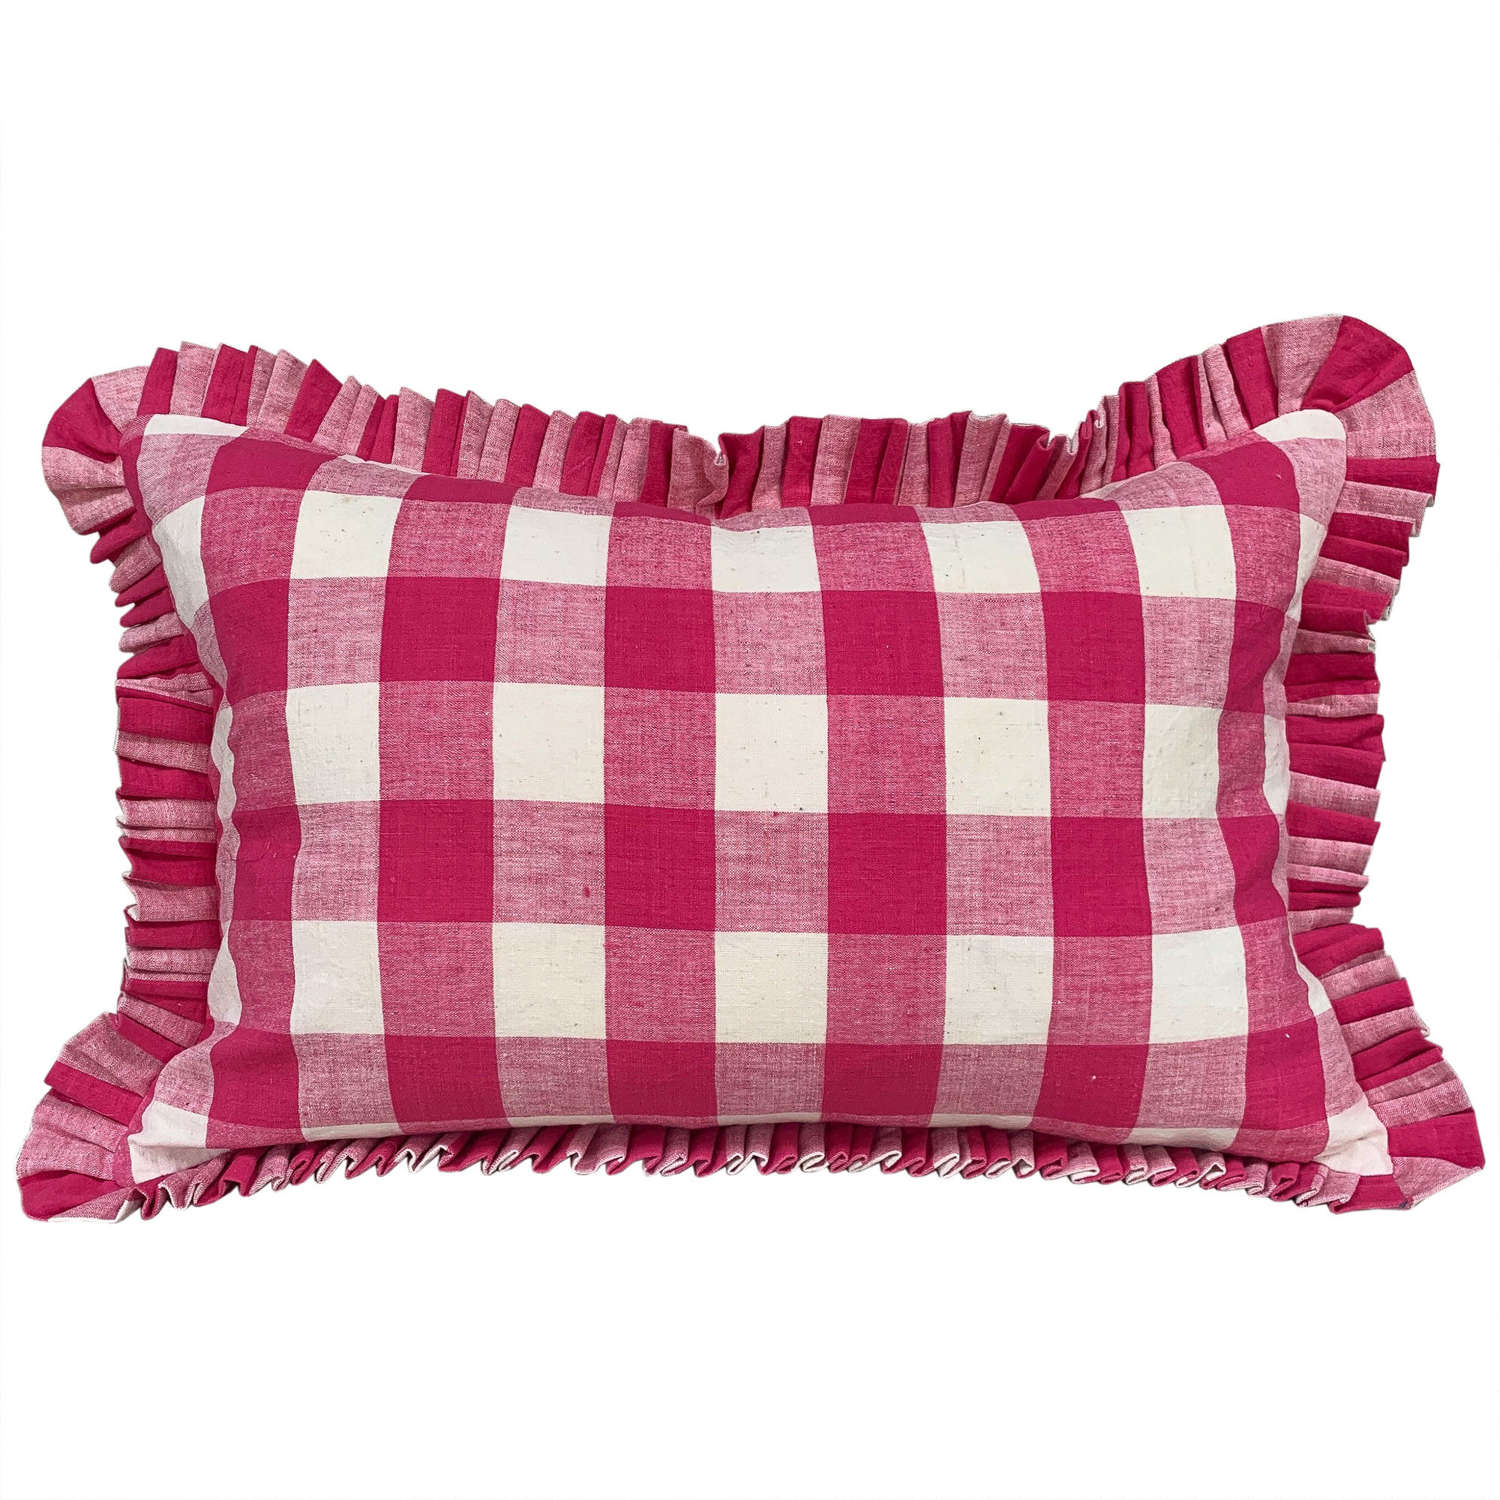 Pink & White Cushions With Frill Trim